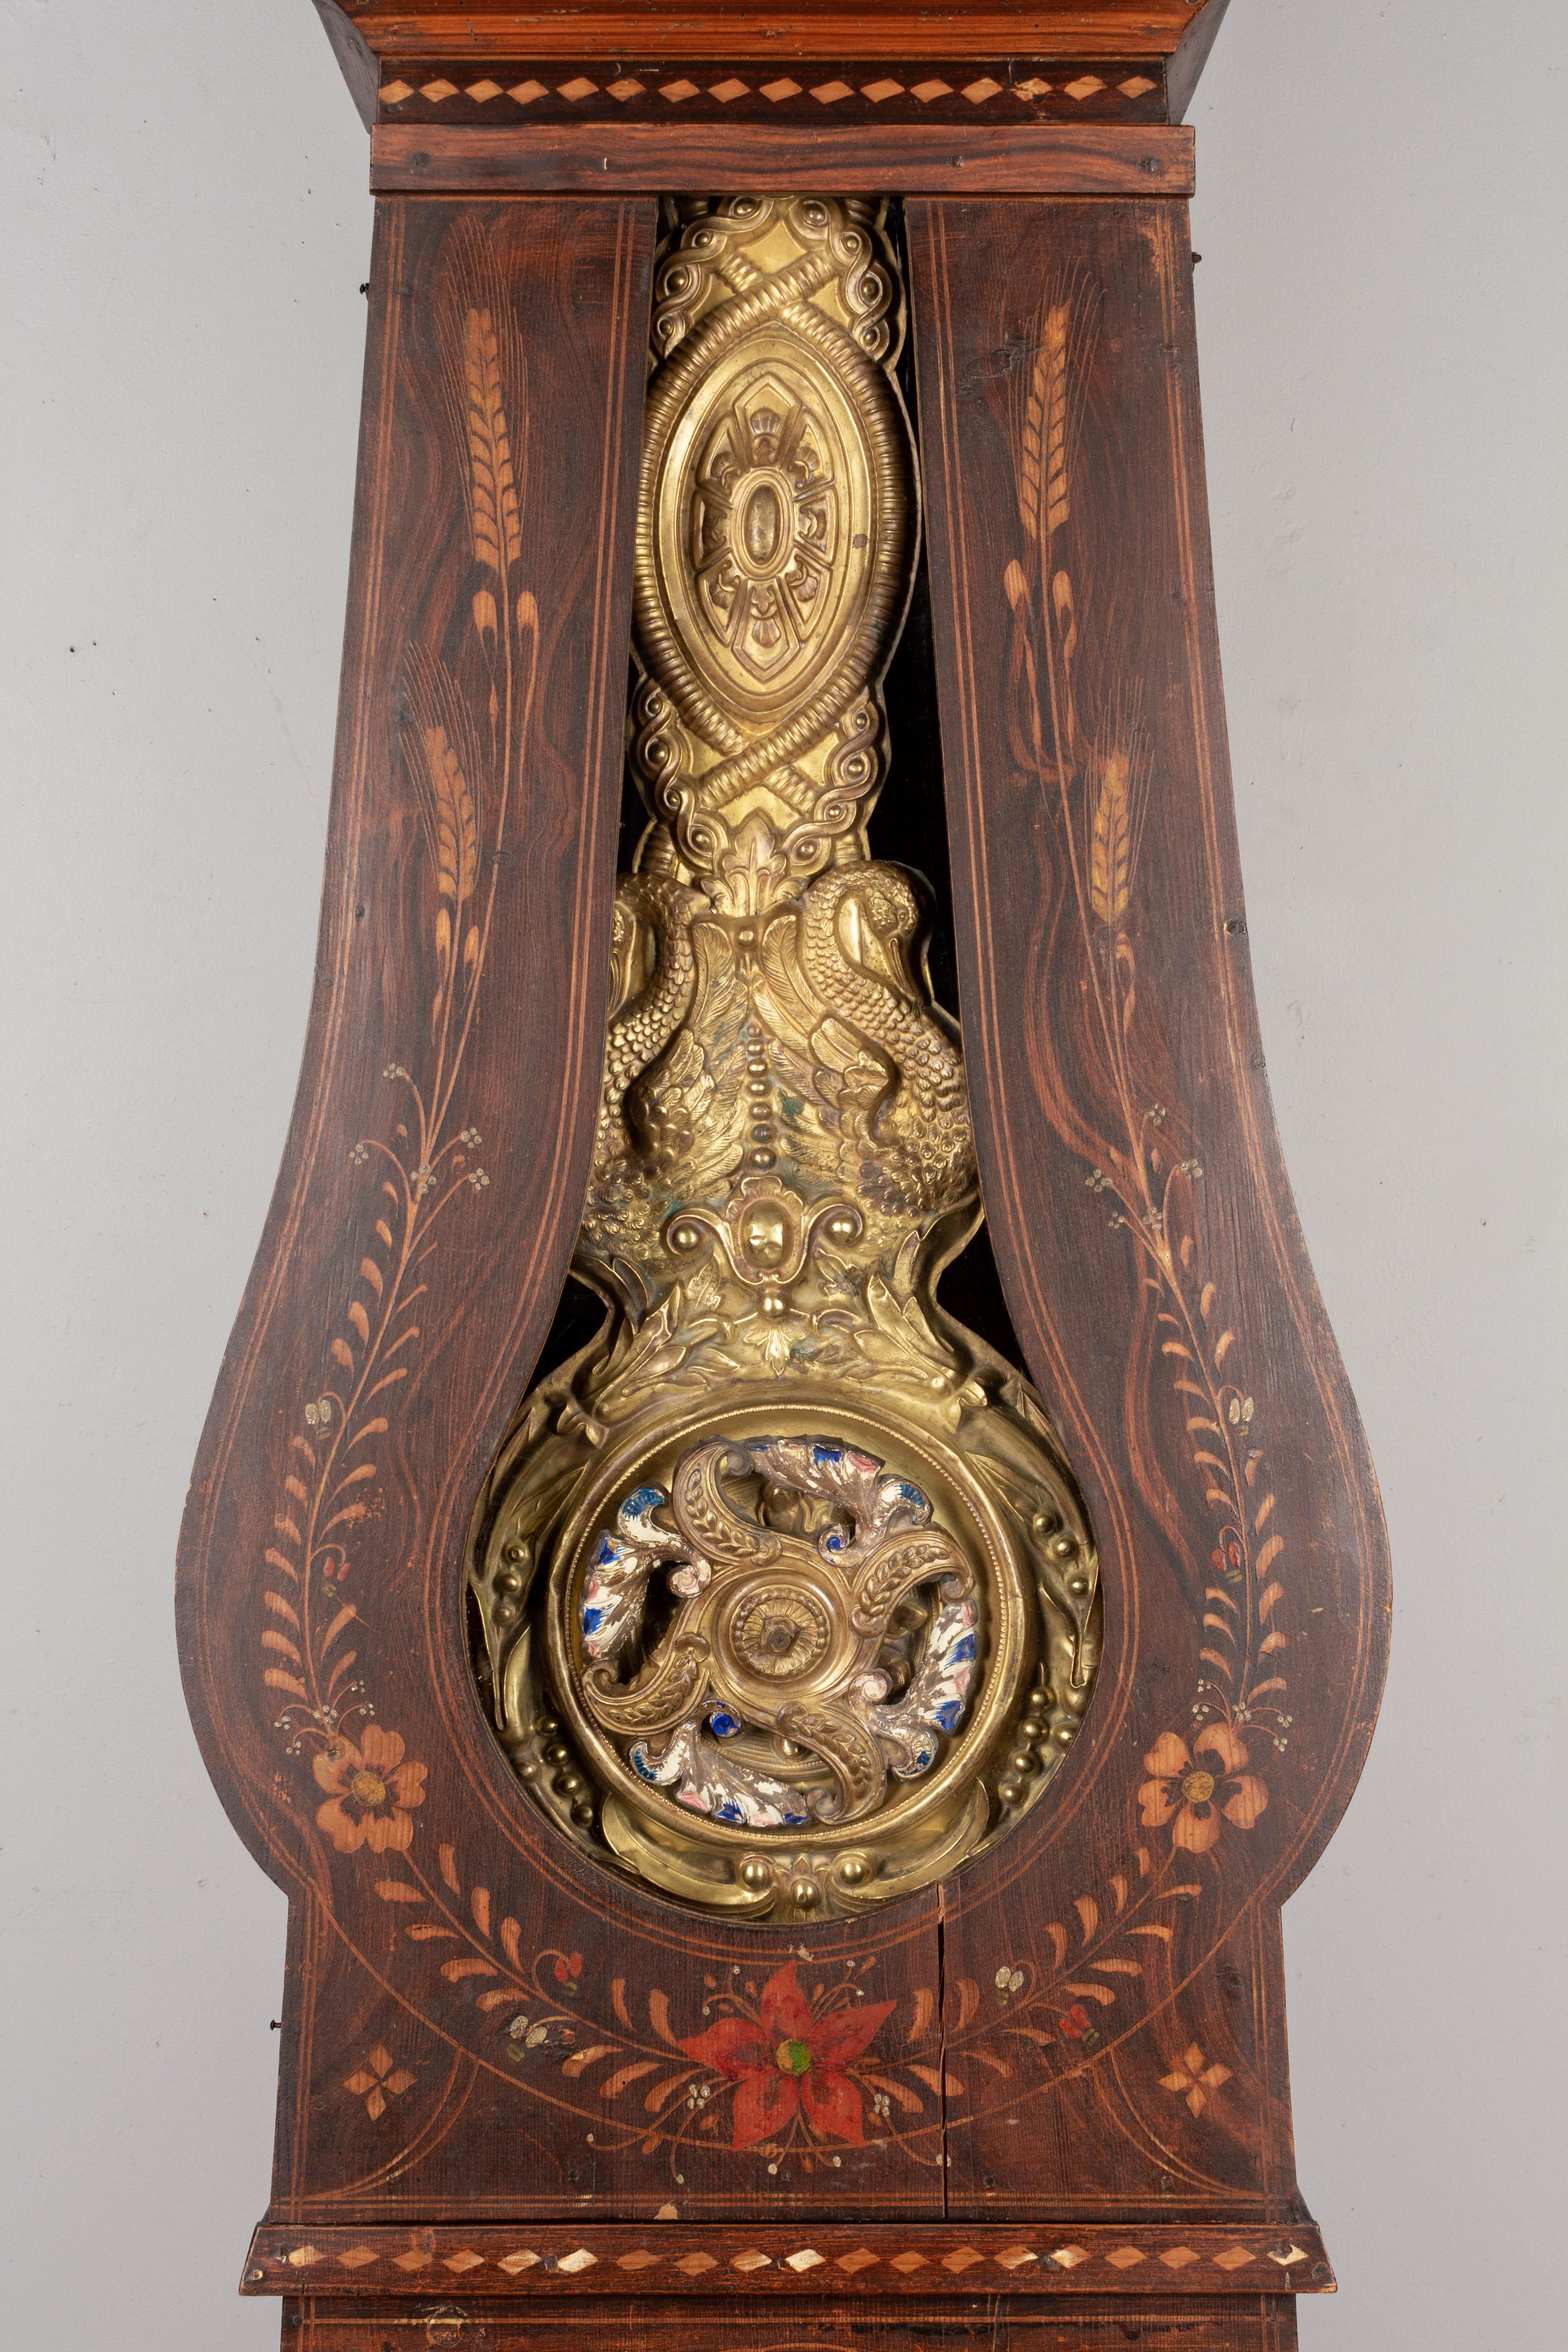 19th Century French Comtoise Grandfather Clock with Automated Pendulum In Good Condition For Sale In Winter Park, FL